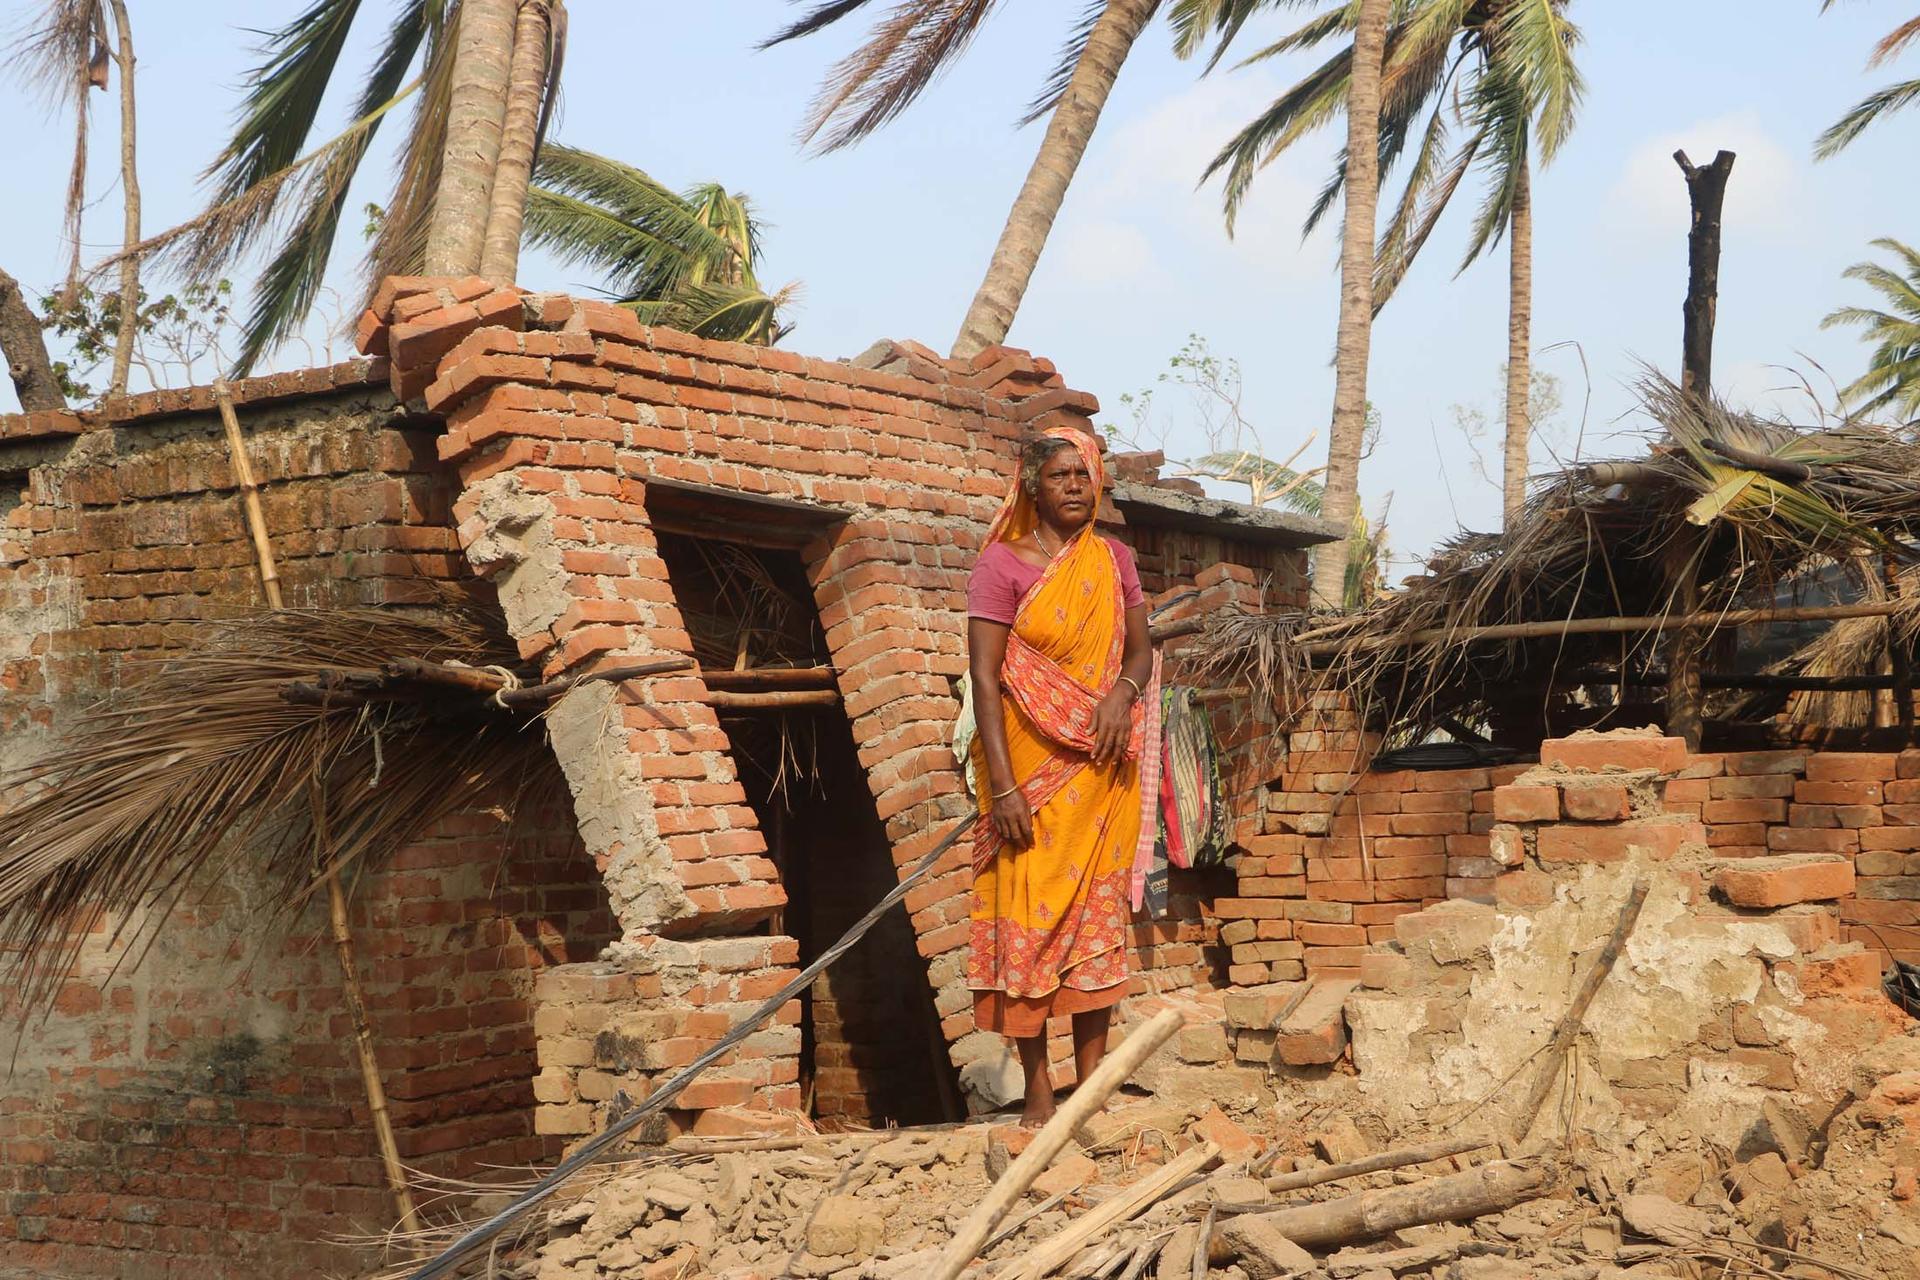 Indian residents struggle in return to homes left roofless by cyclone